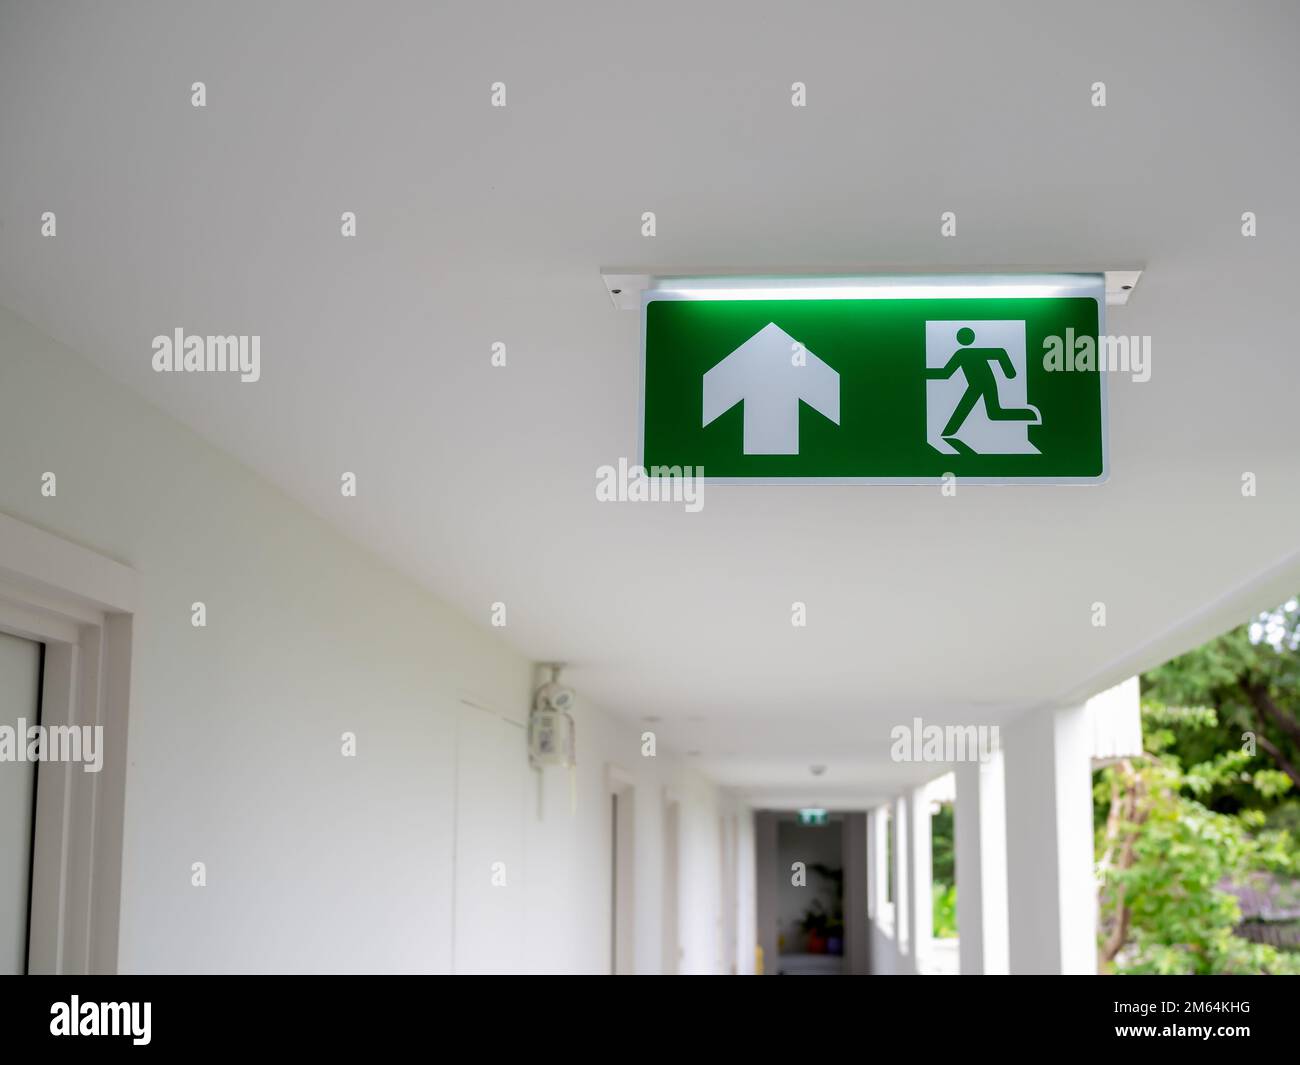 Green fire escape sign hang on the ceiling at the corridor in the white hotel building near the stairway. Emergency fire exit sign, warning plate with Stock Photo